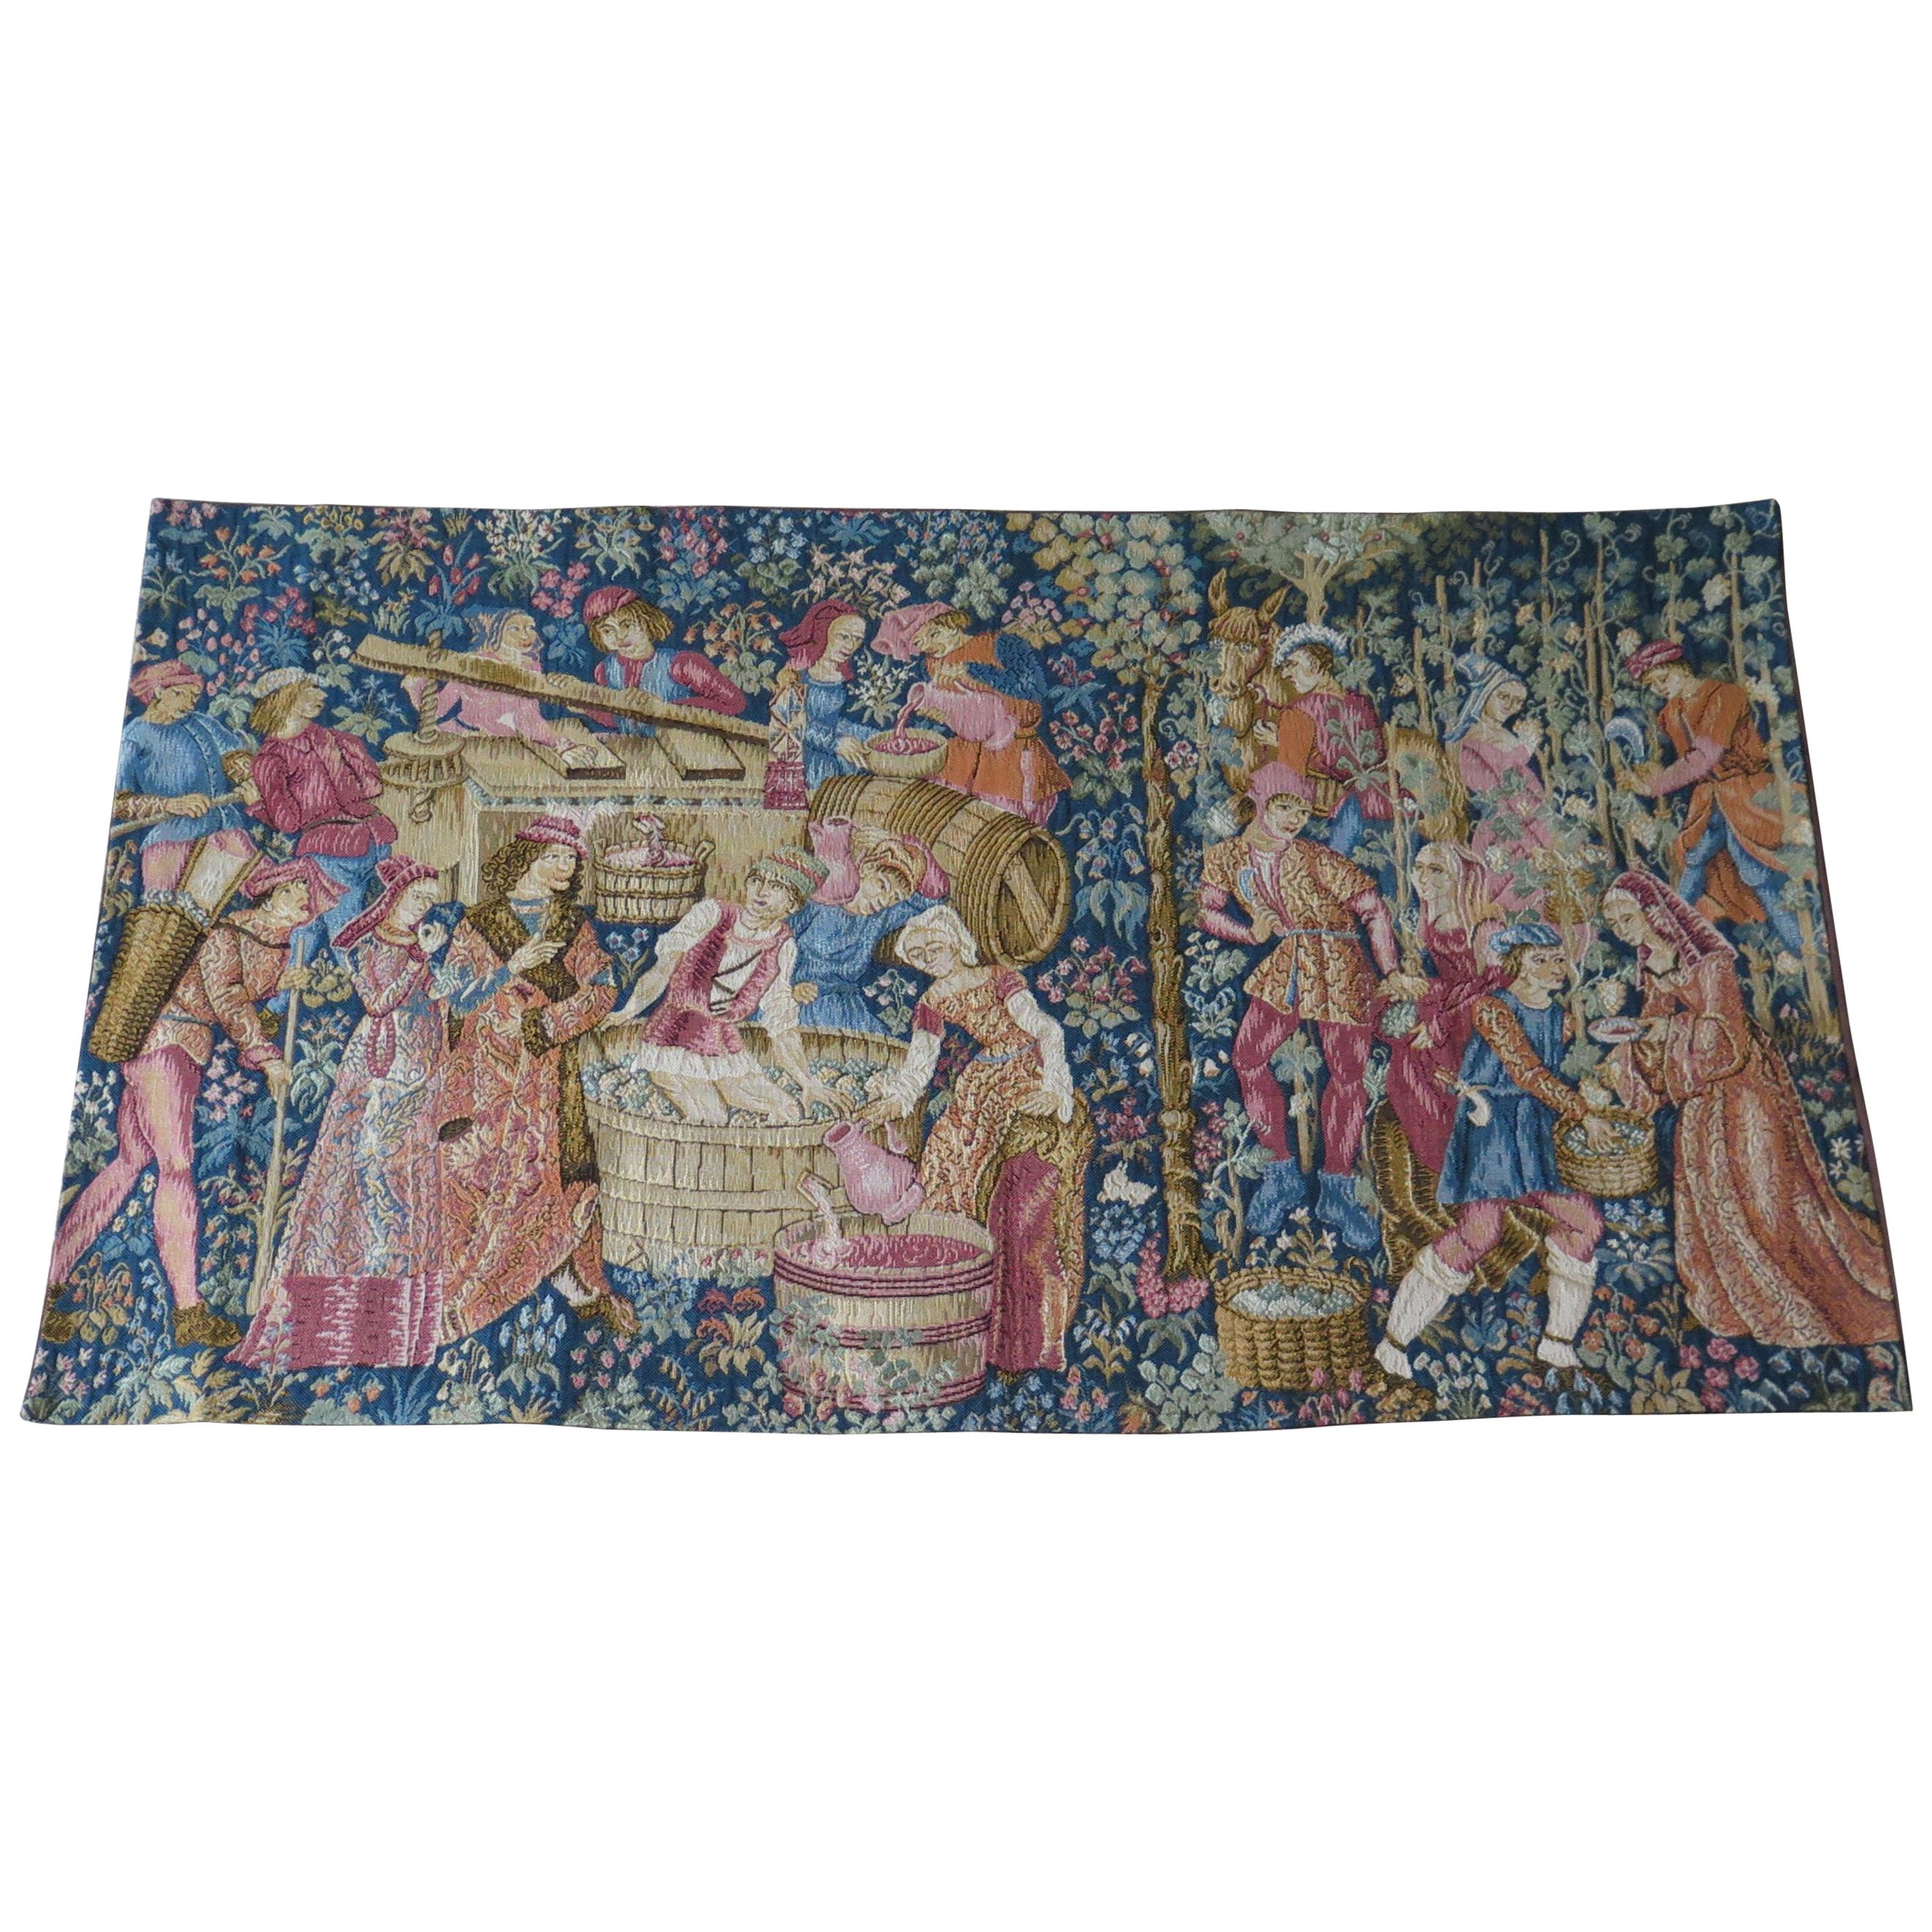 Woven Wall Hanging Tapestry Depicting Wine Making, French, 20th Century